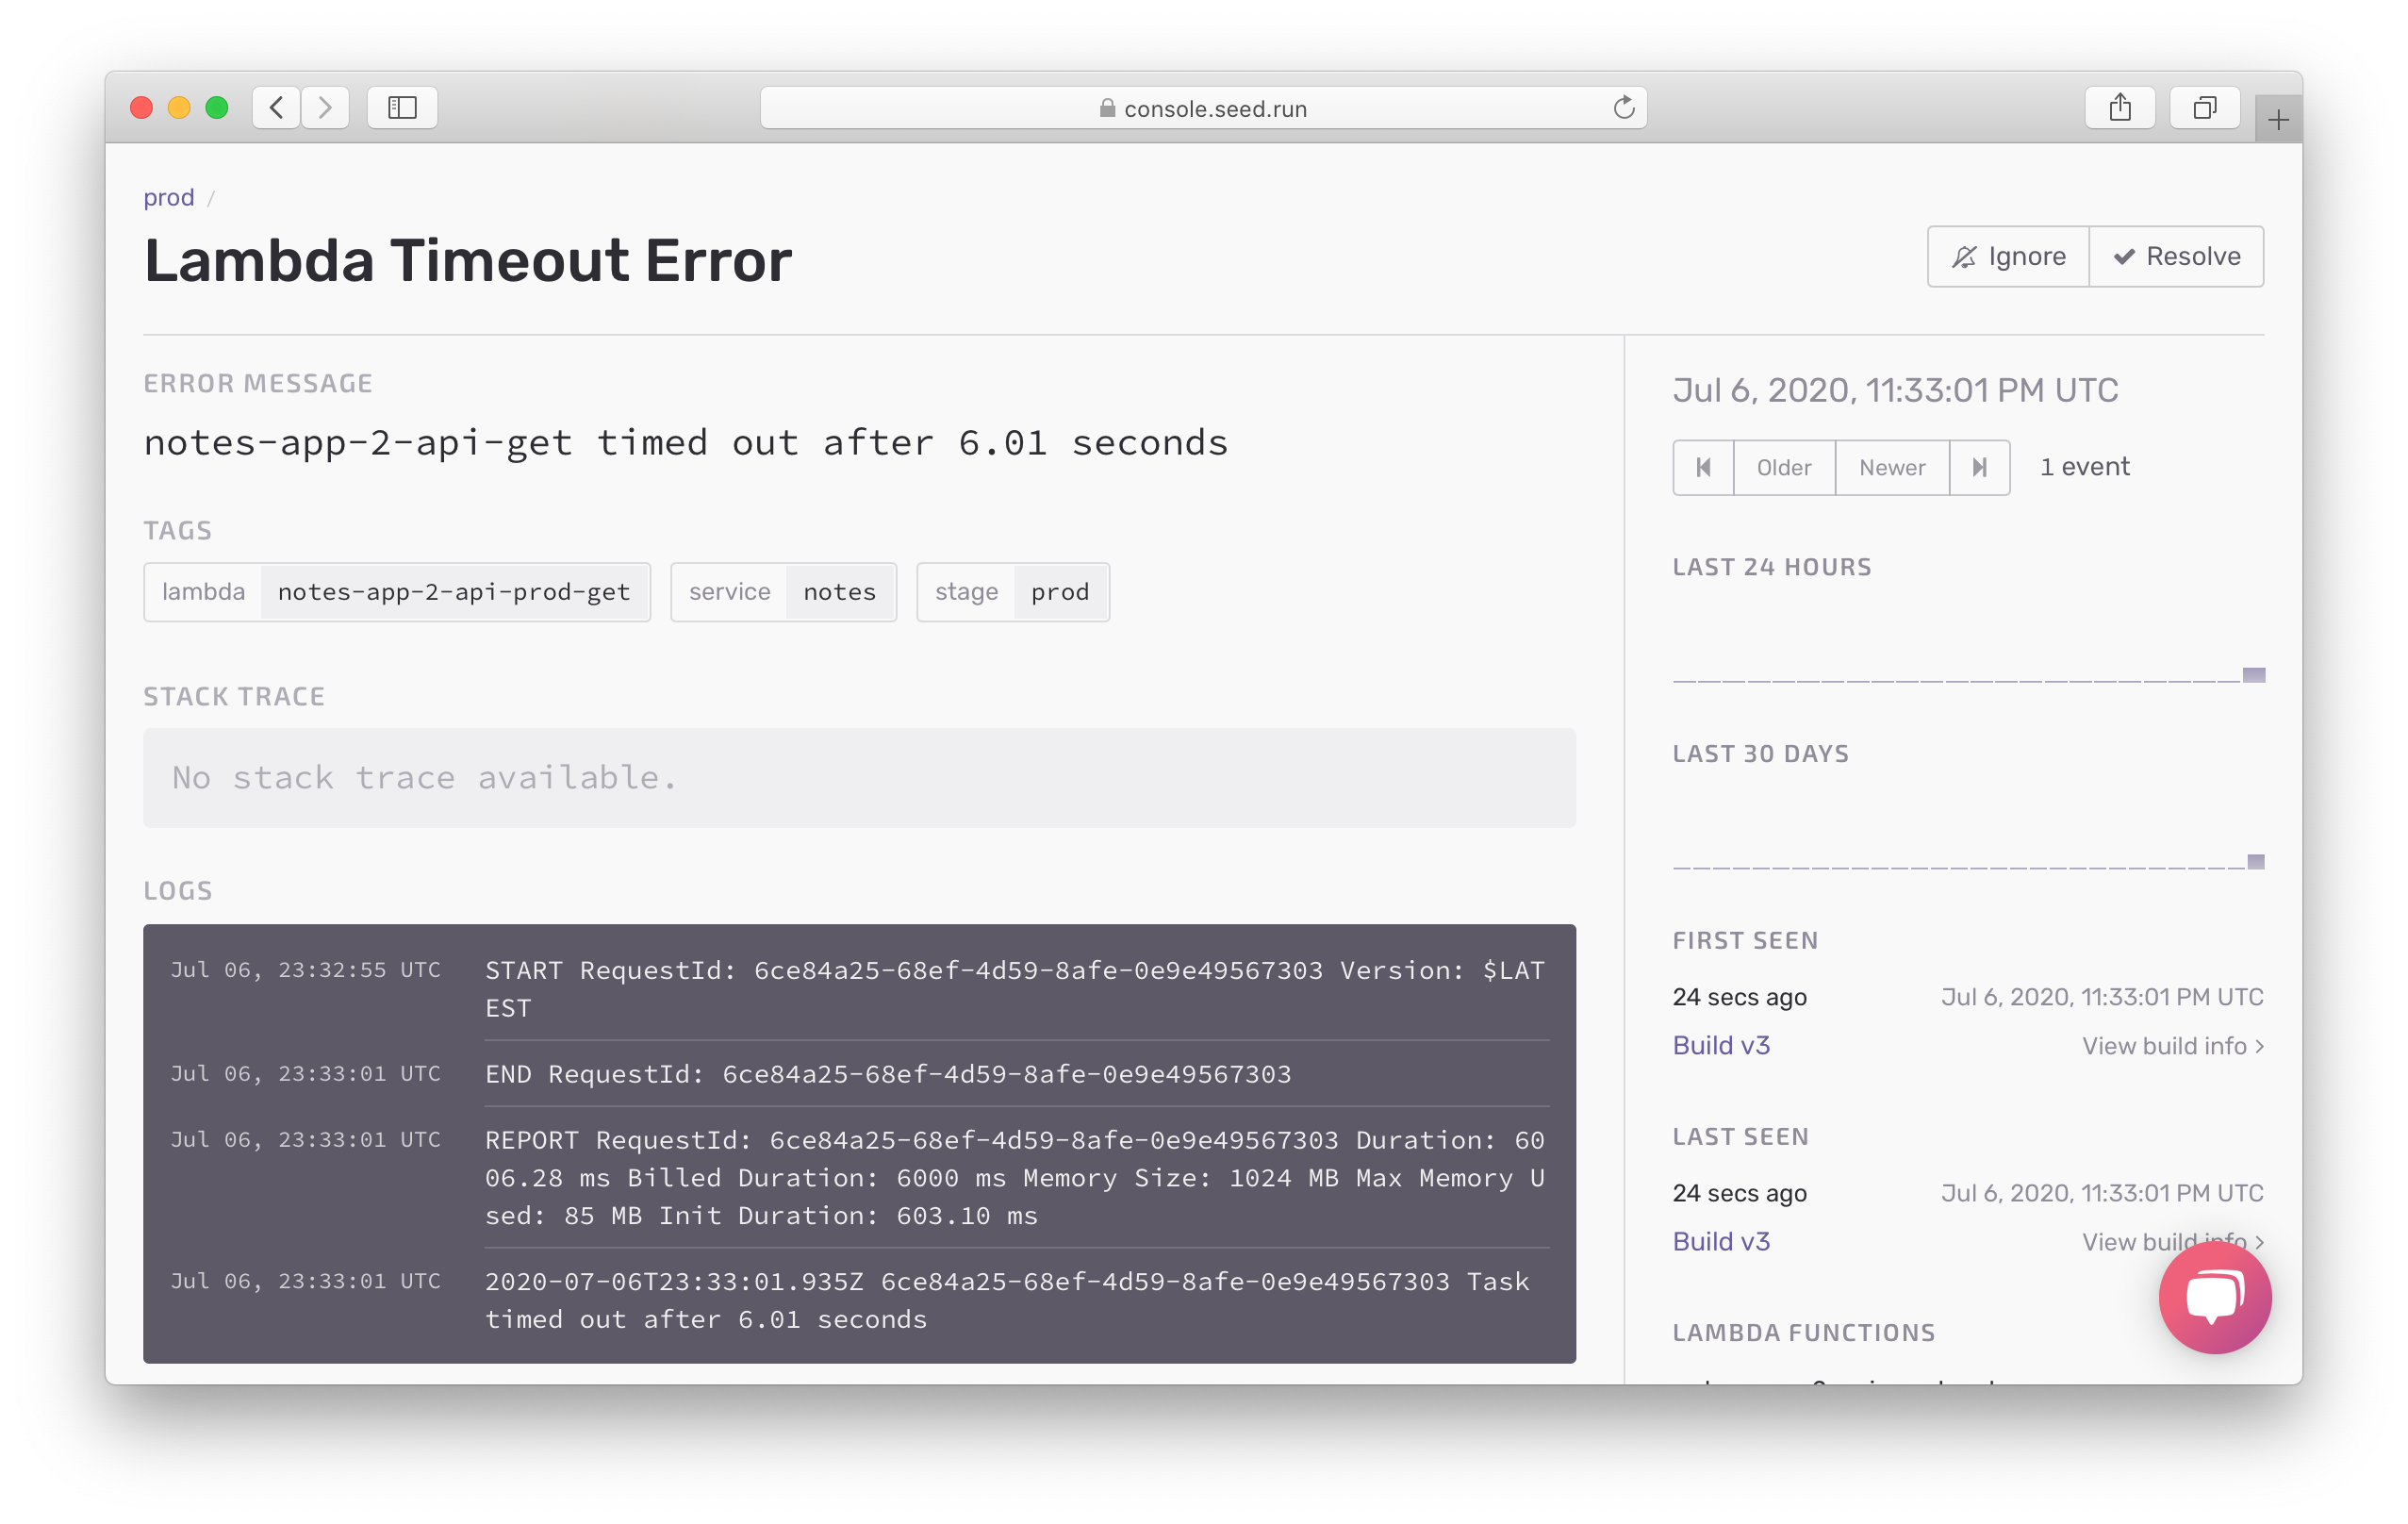 Timeout error details in Seed